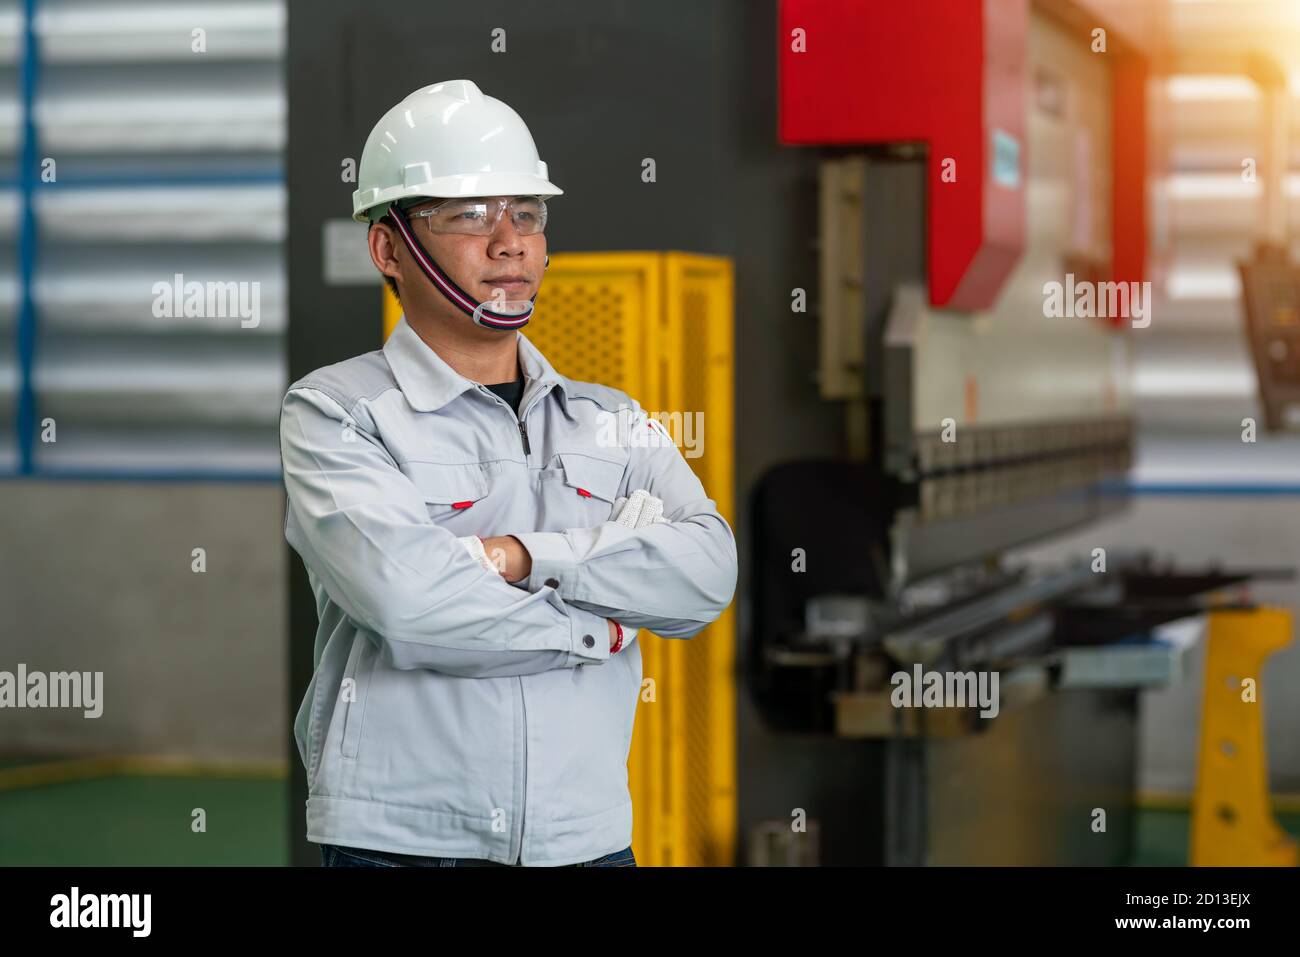 The worker in the uniform machine shop Stock Photo